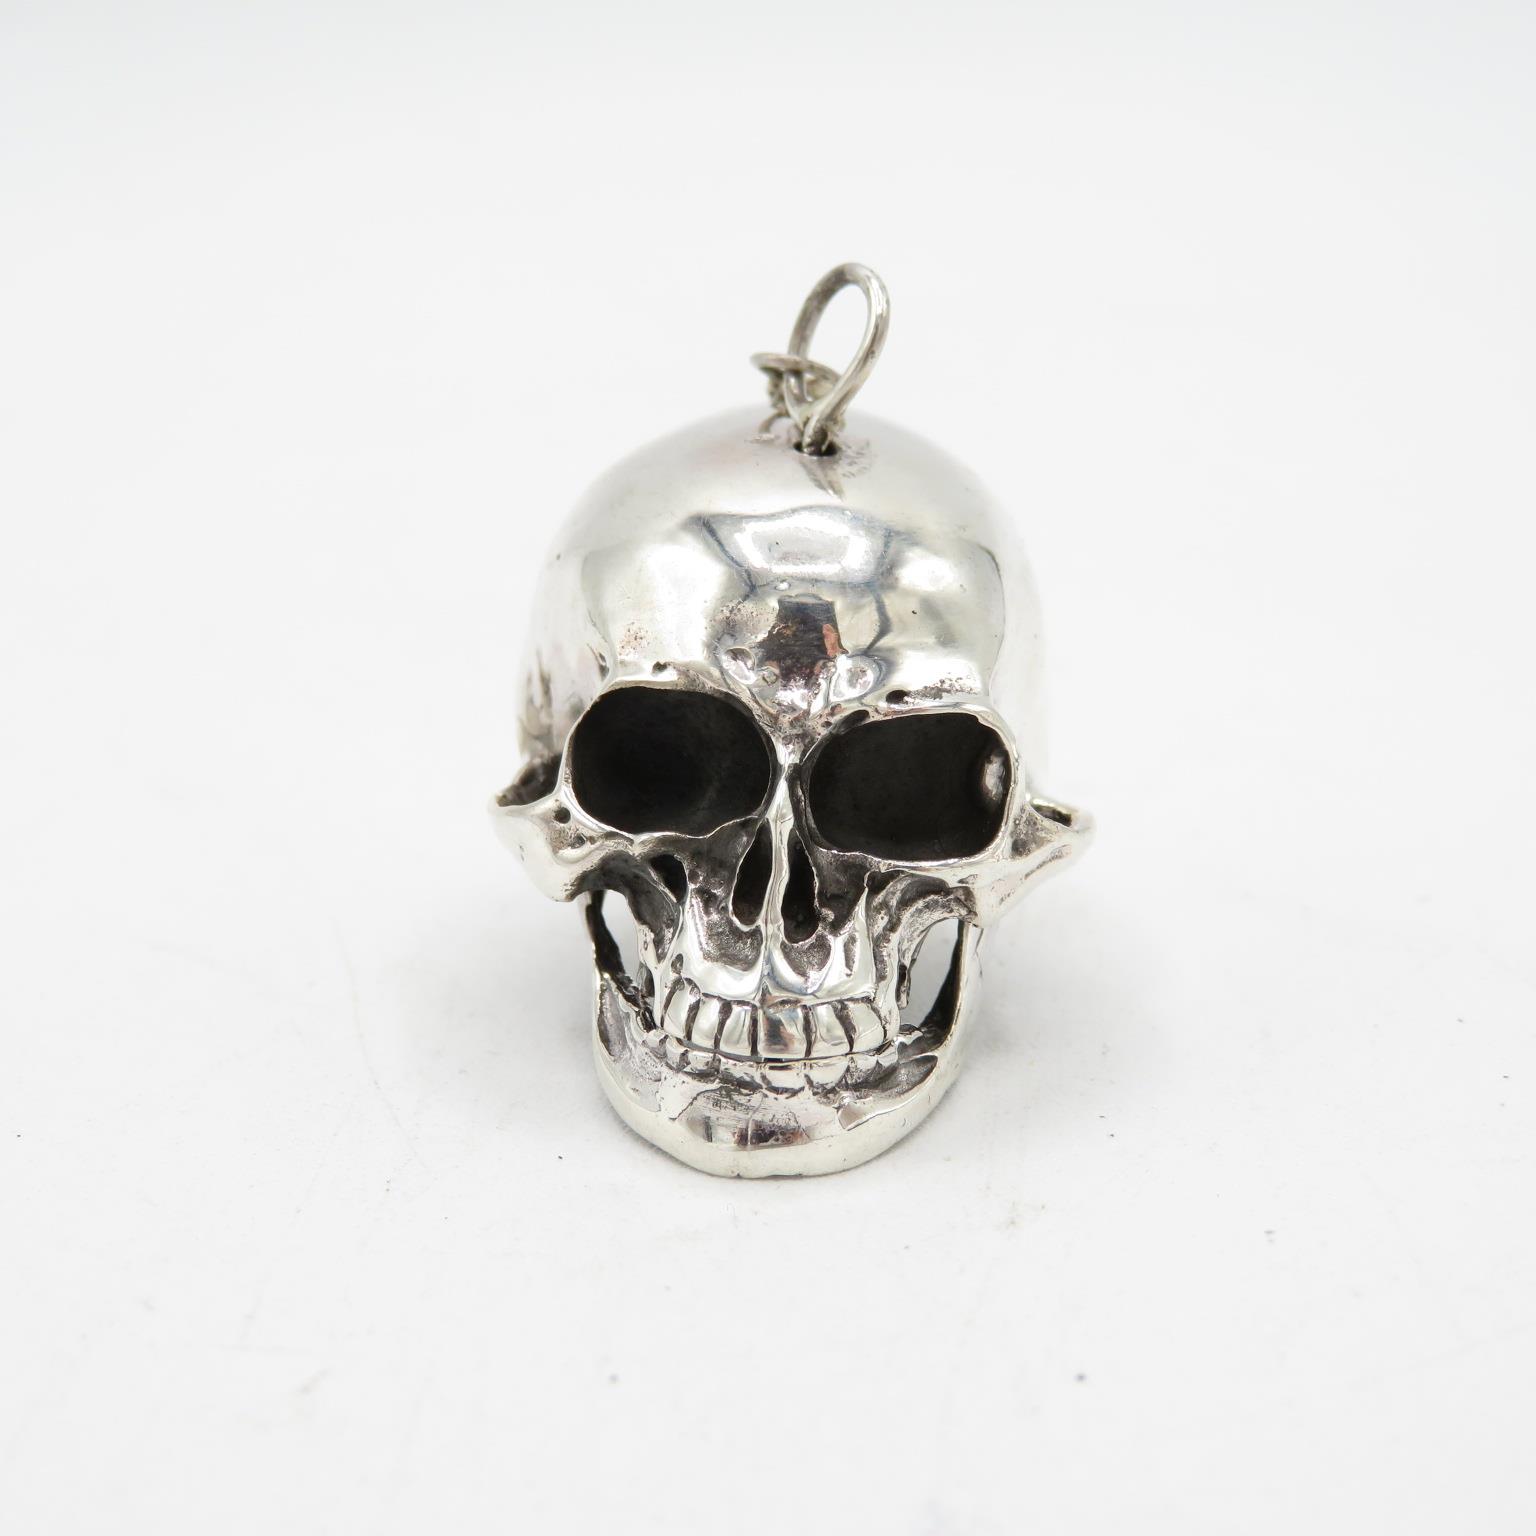 Extremely fine detailed articulated Memento Mori human skull in sterling silver with hinged bottom - Image 2 of 6